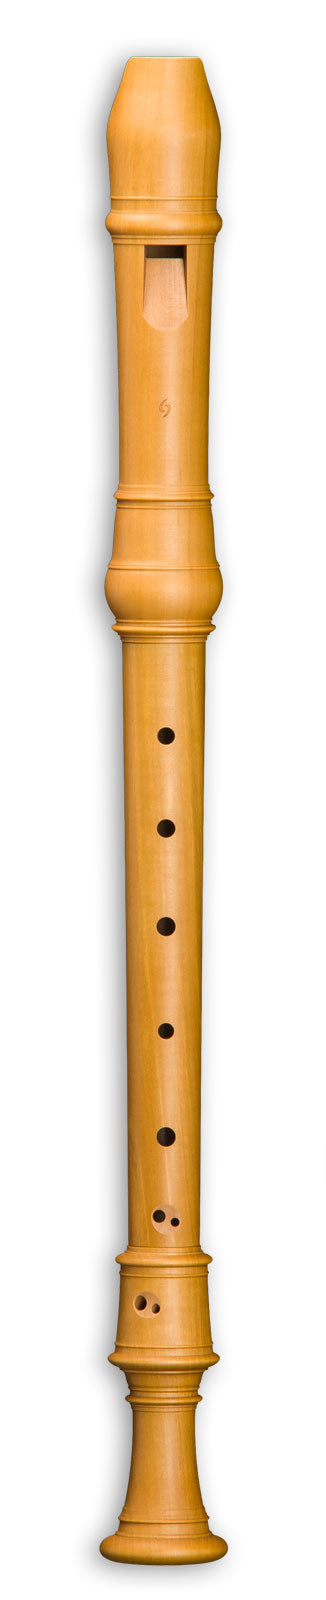 Mollenhauer Denner Alto Recorder In Pearwood A415 At The Ems — Early